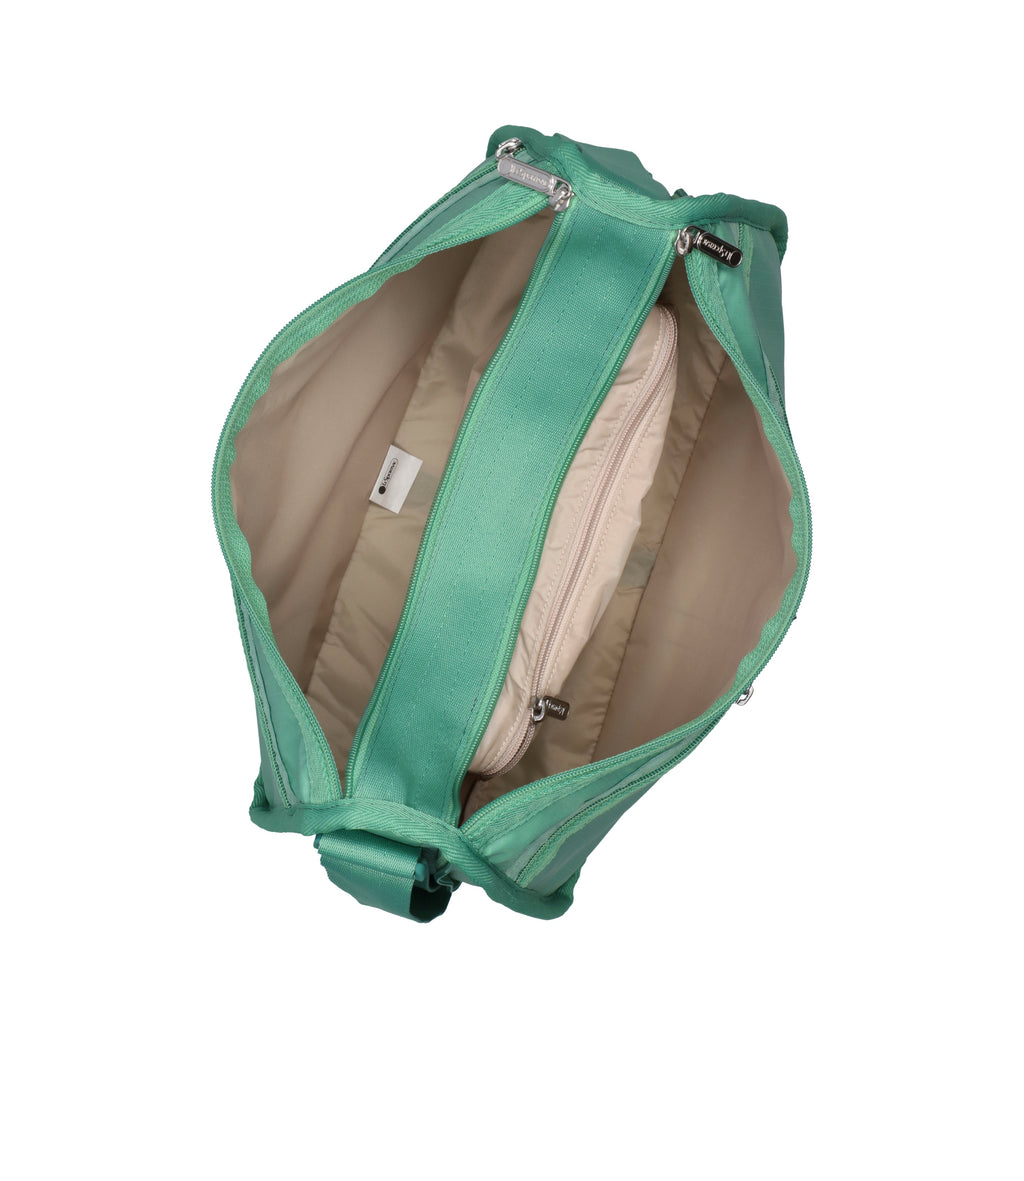 Deluxe Everyday Bag - Sage Green solid – LeSportsac